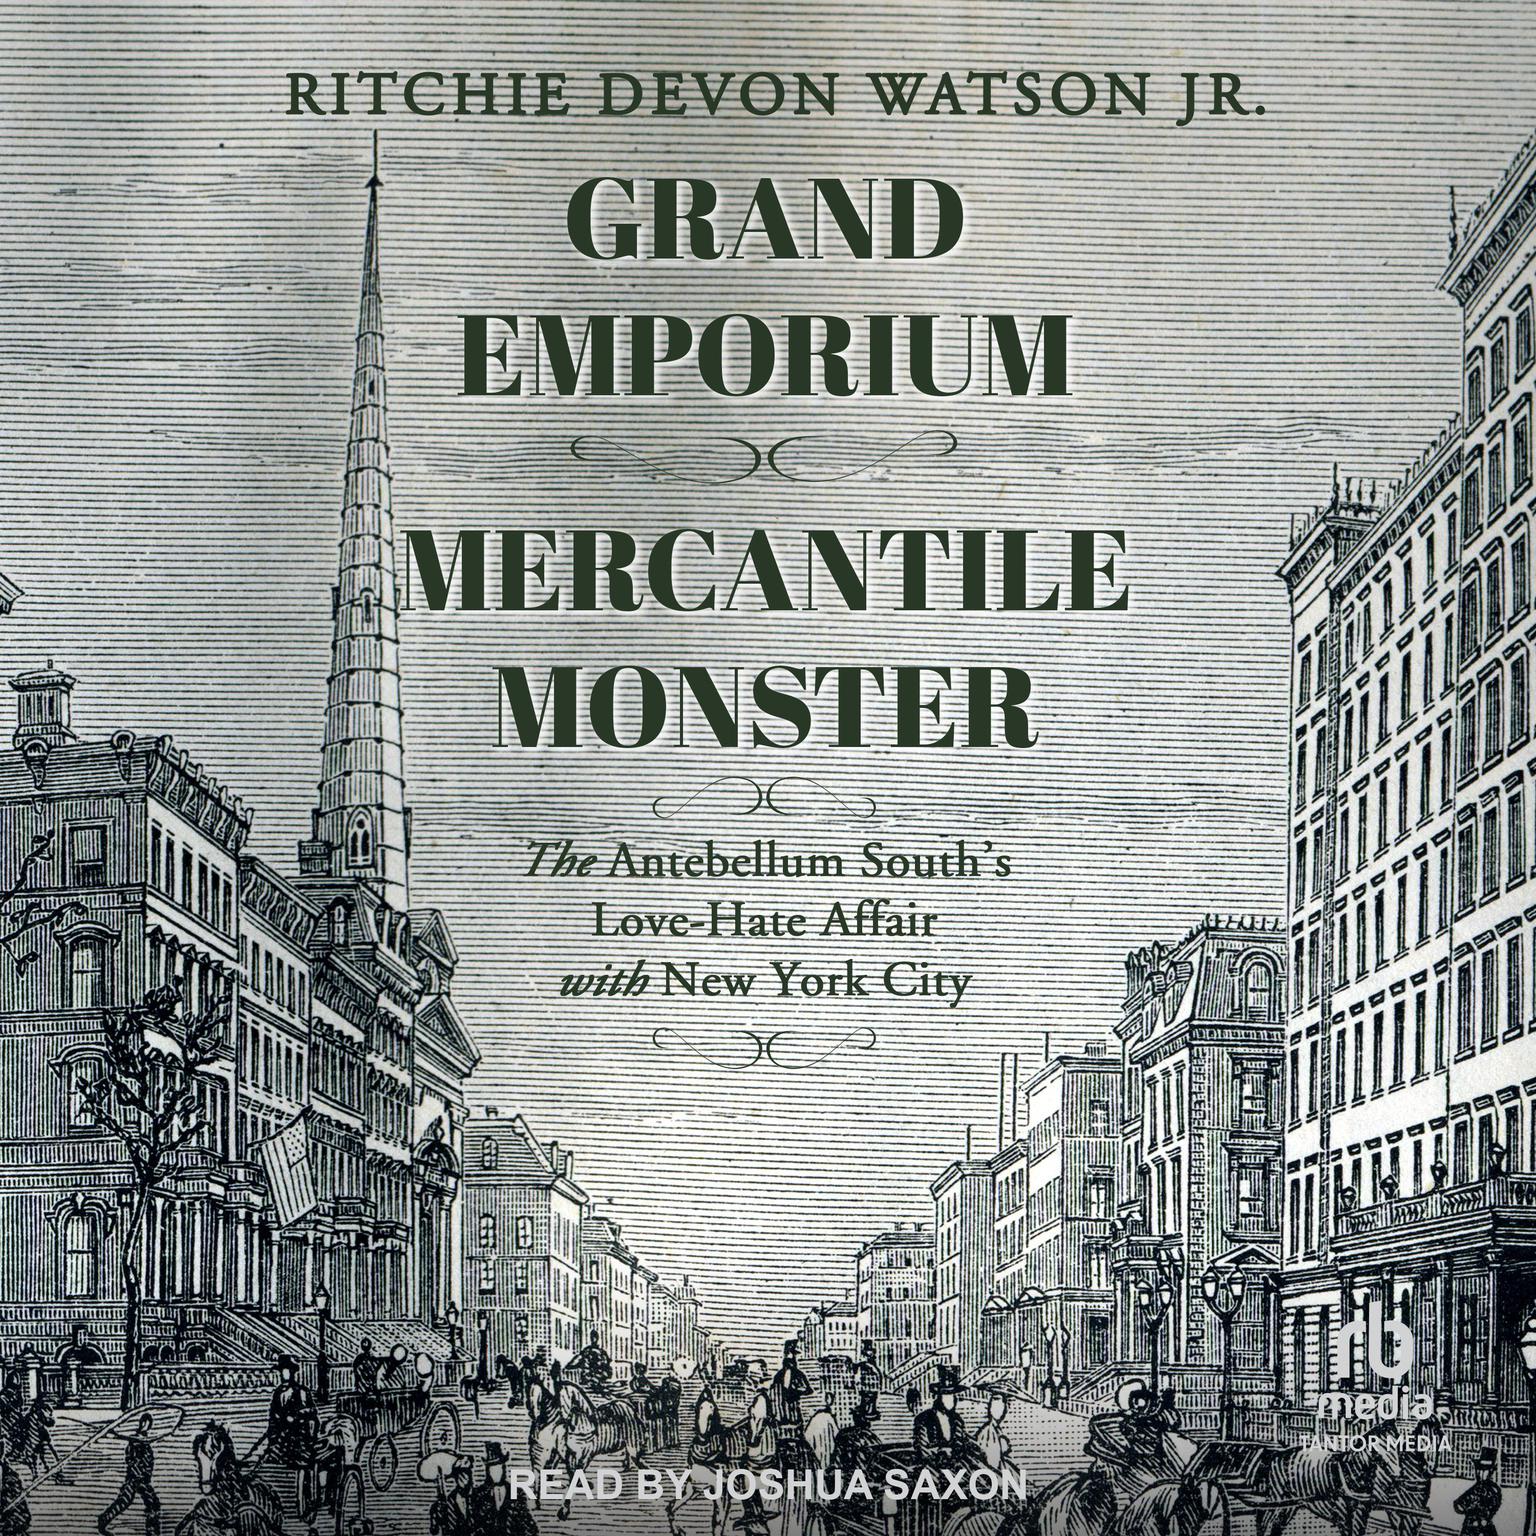 Grand Emporium, Mercantile Monster: The Antebellum South’s Love-Hate Affair With New York City Audiobook, by Ritchie Devon Watson